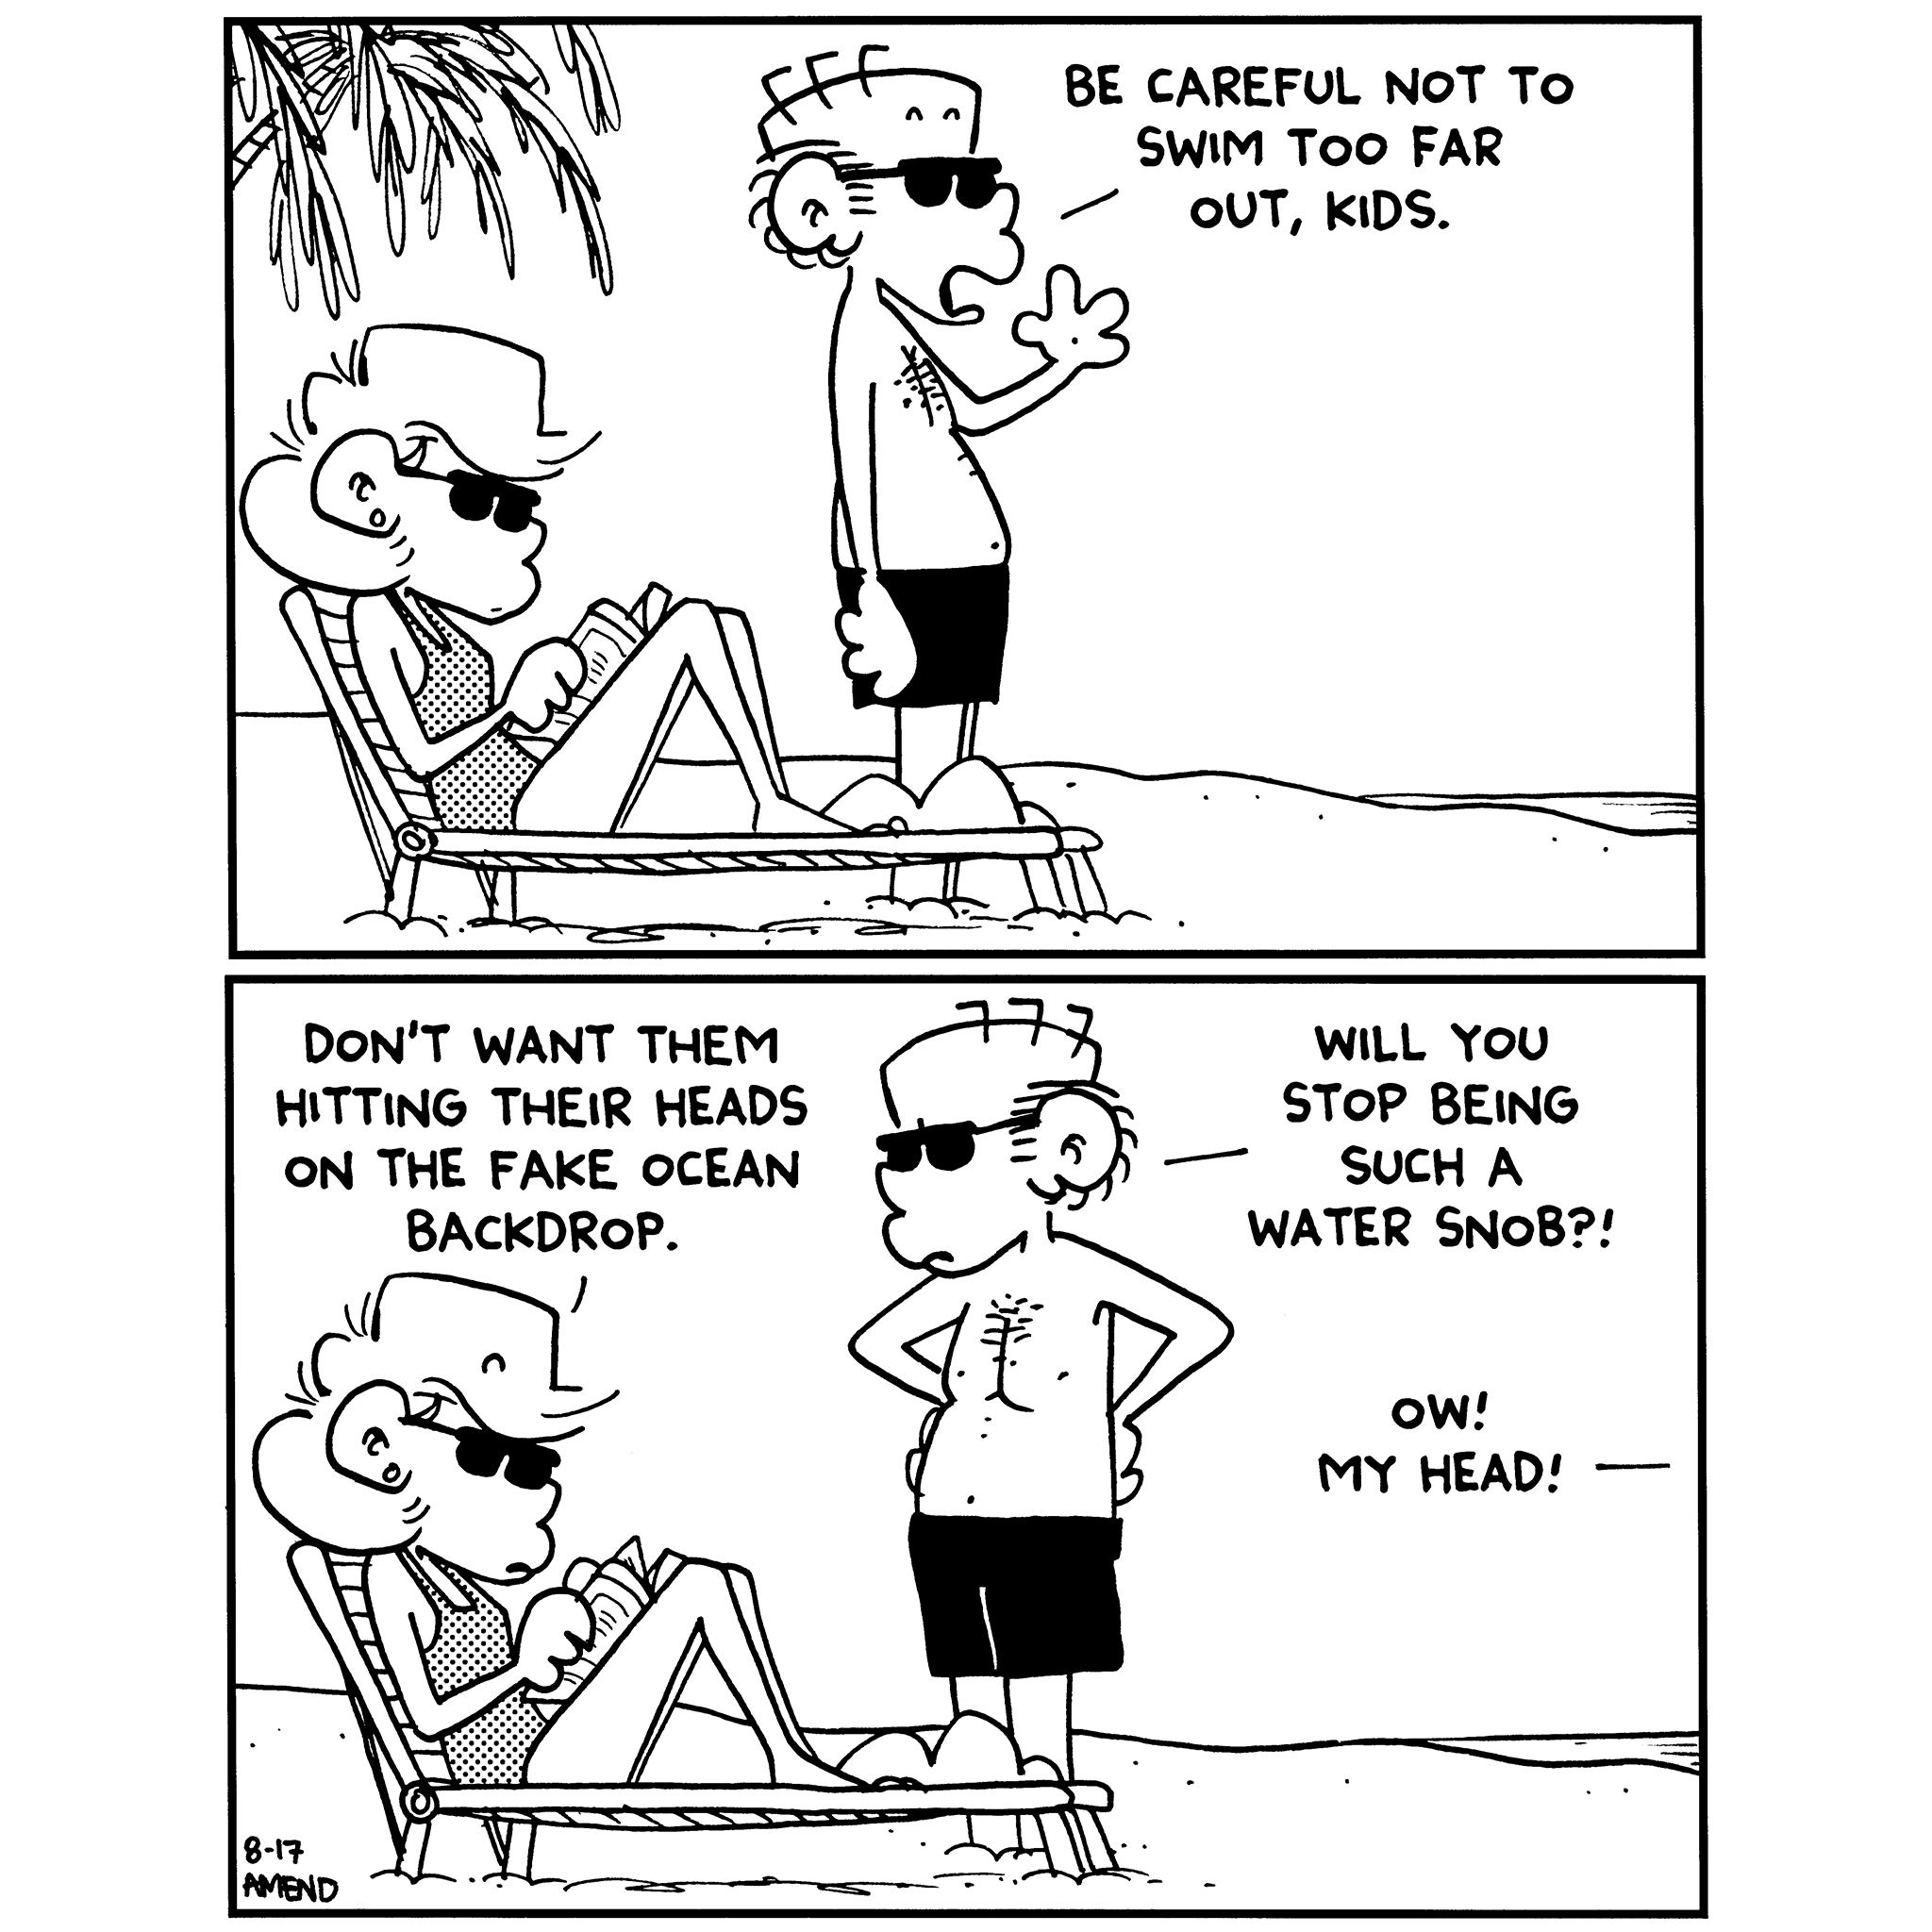 FoxTrot comic strip by Bill Amend - August 17, 2001 - Caribbeanny Vacation